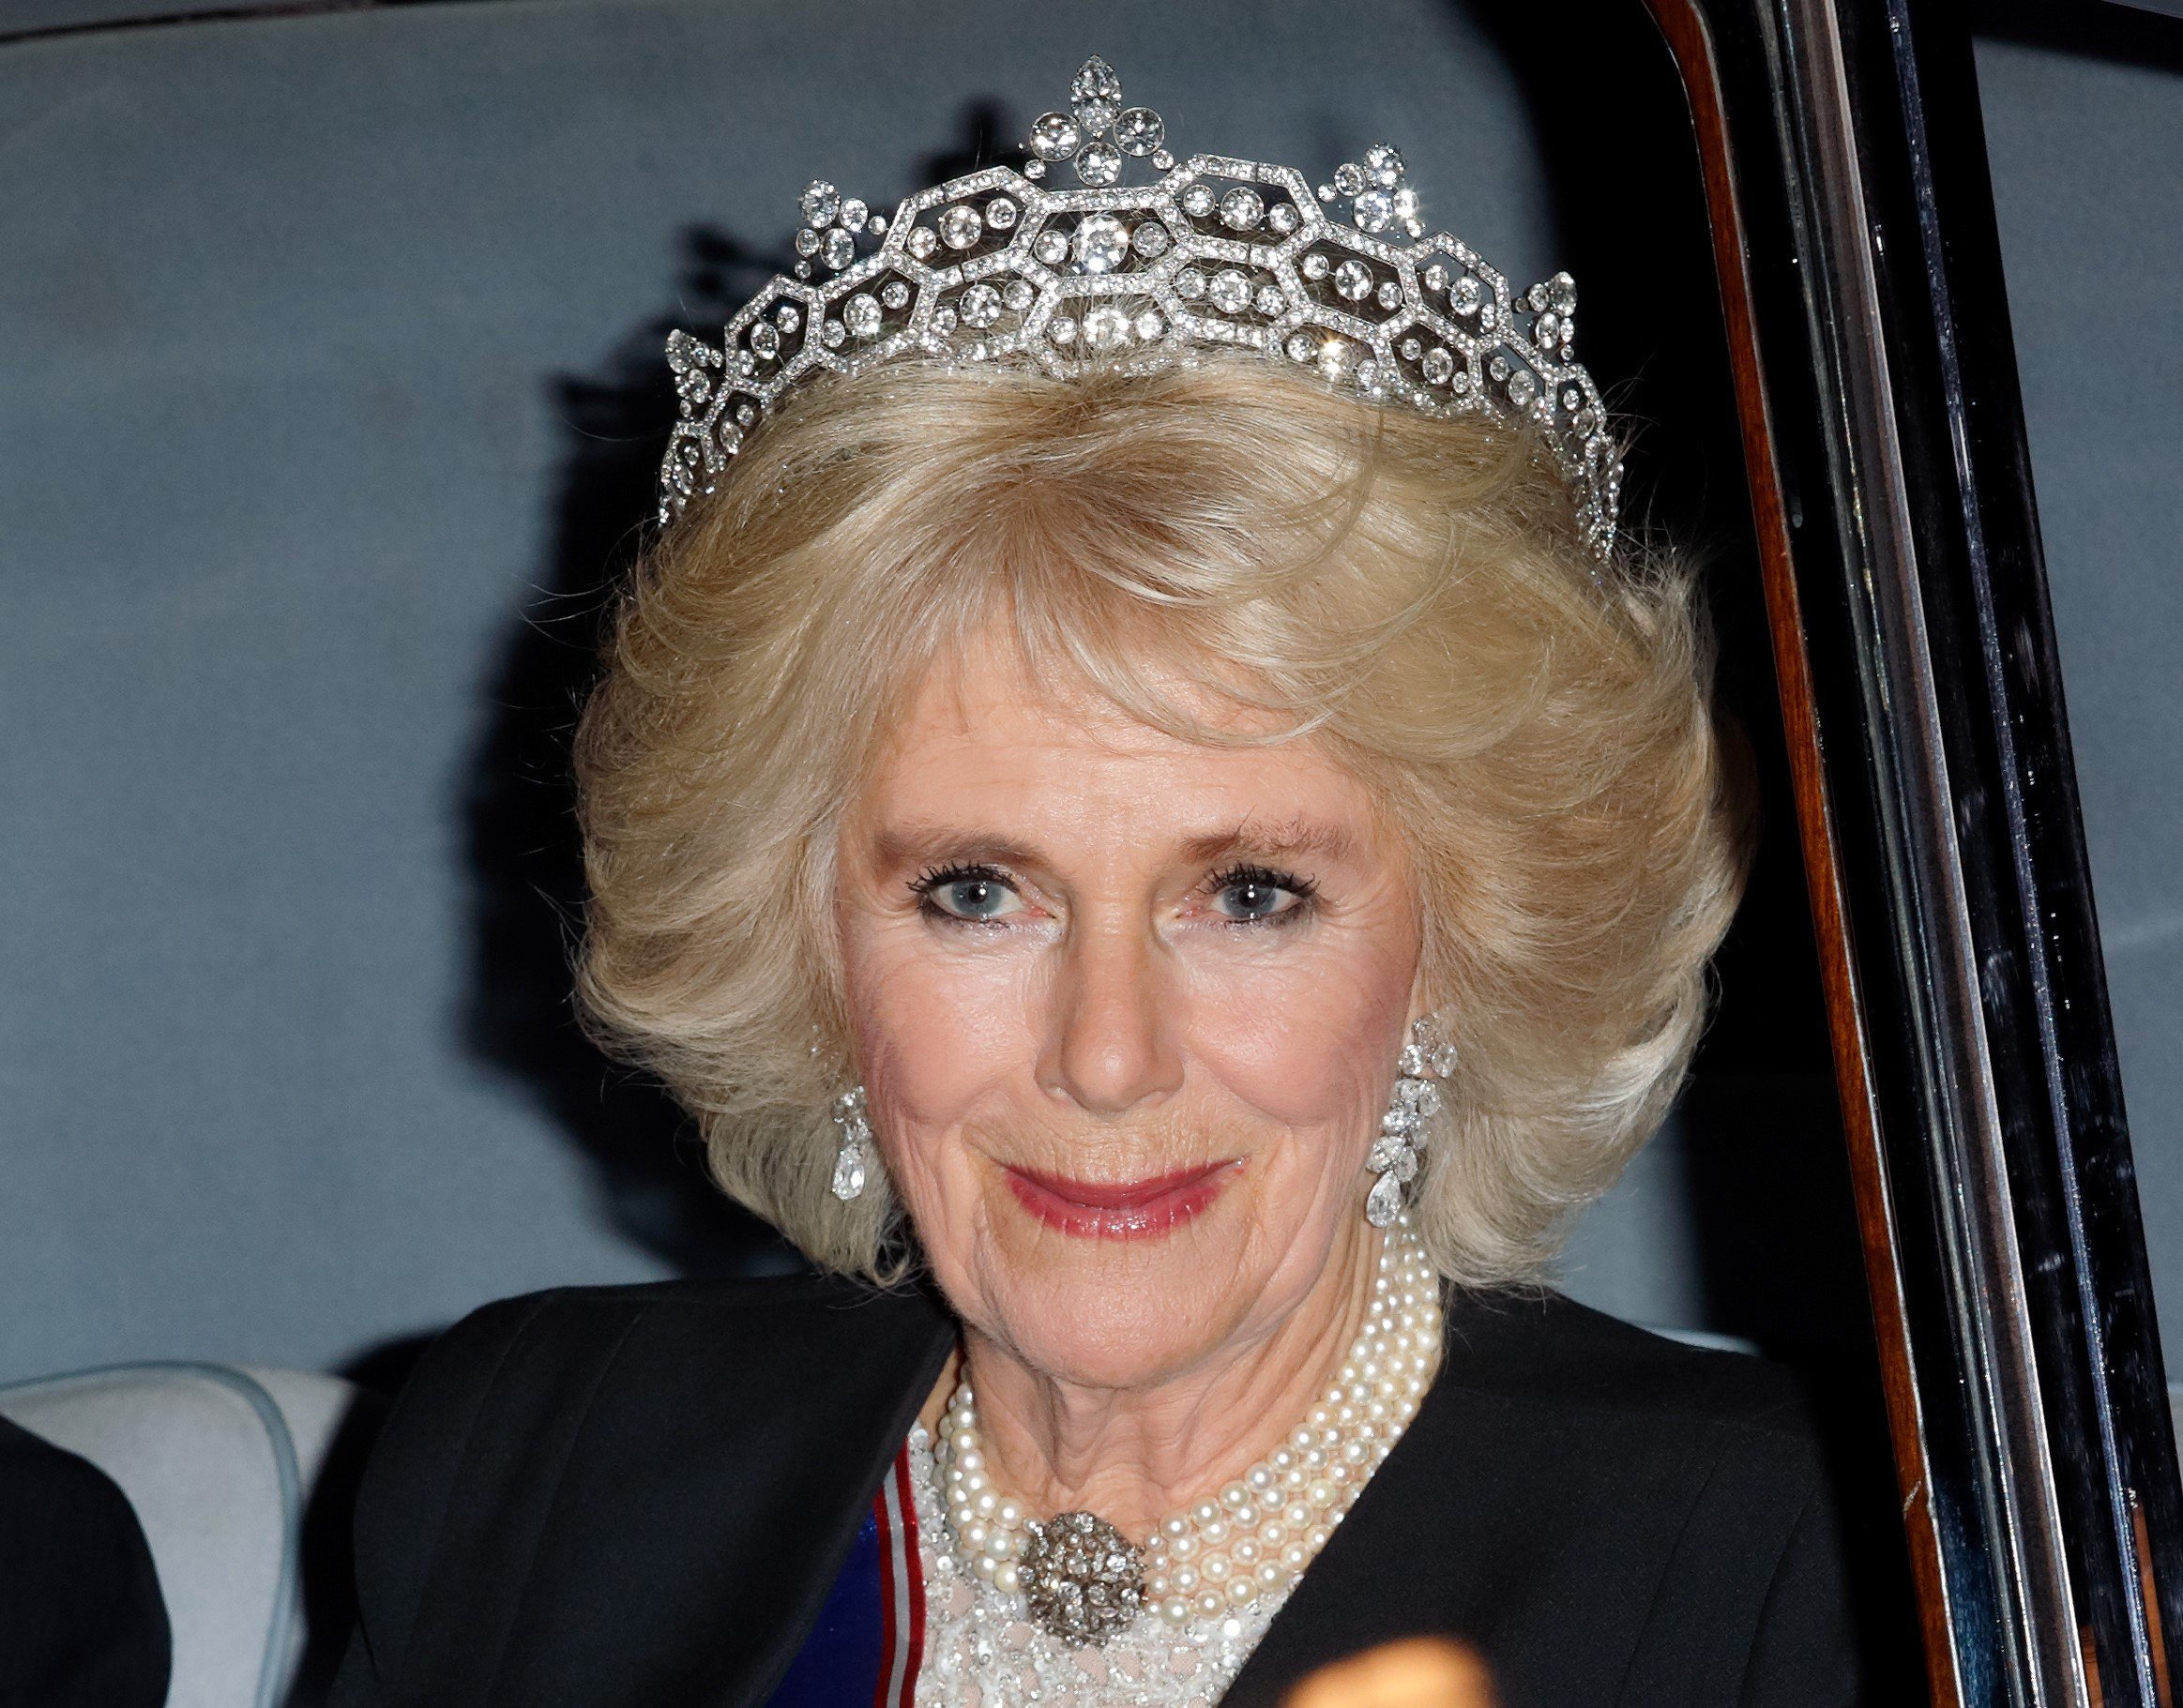 Camilla Parker Bowles attends the annual Diplomatic Reception at Buckingham Palace wearing pearls and a tiara